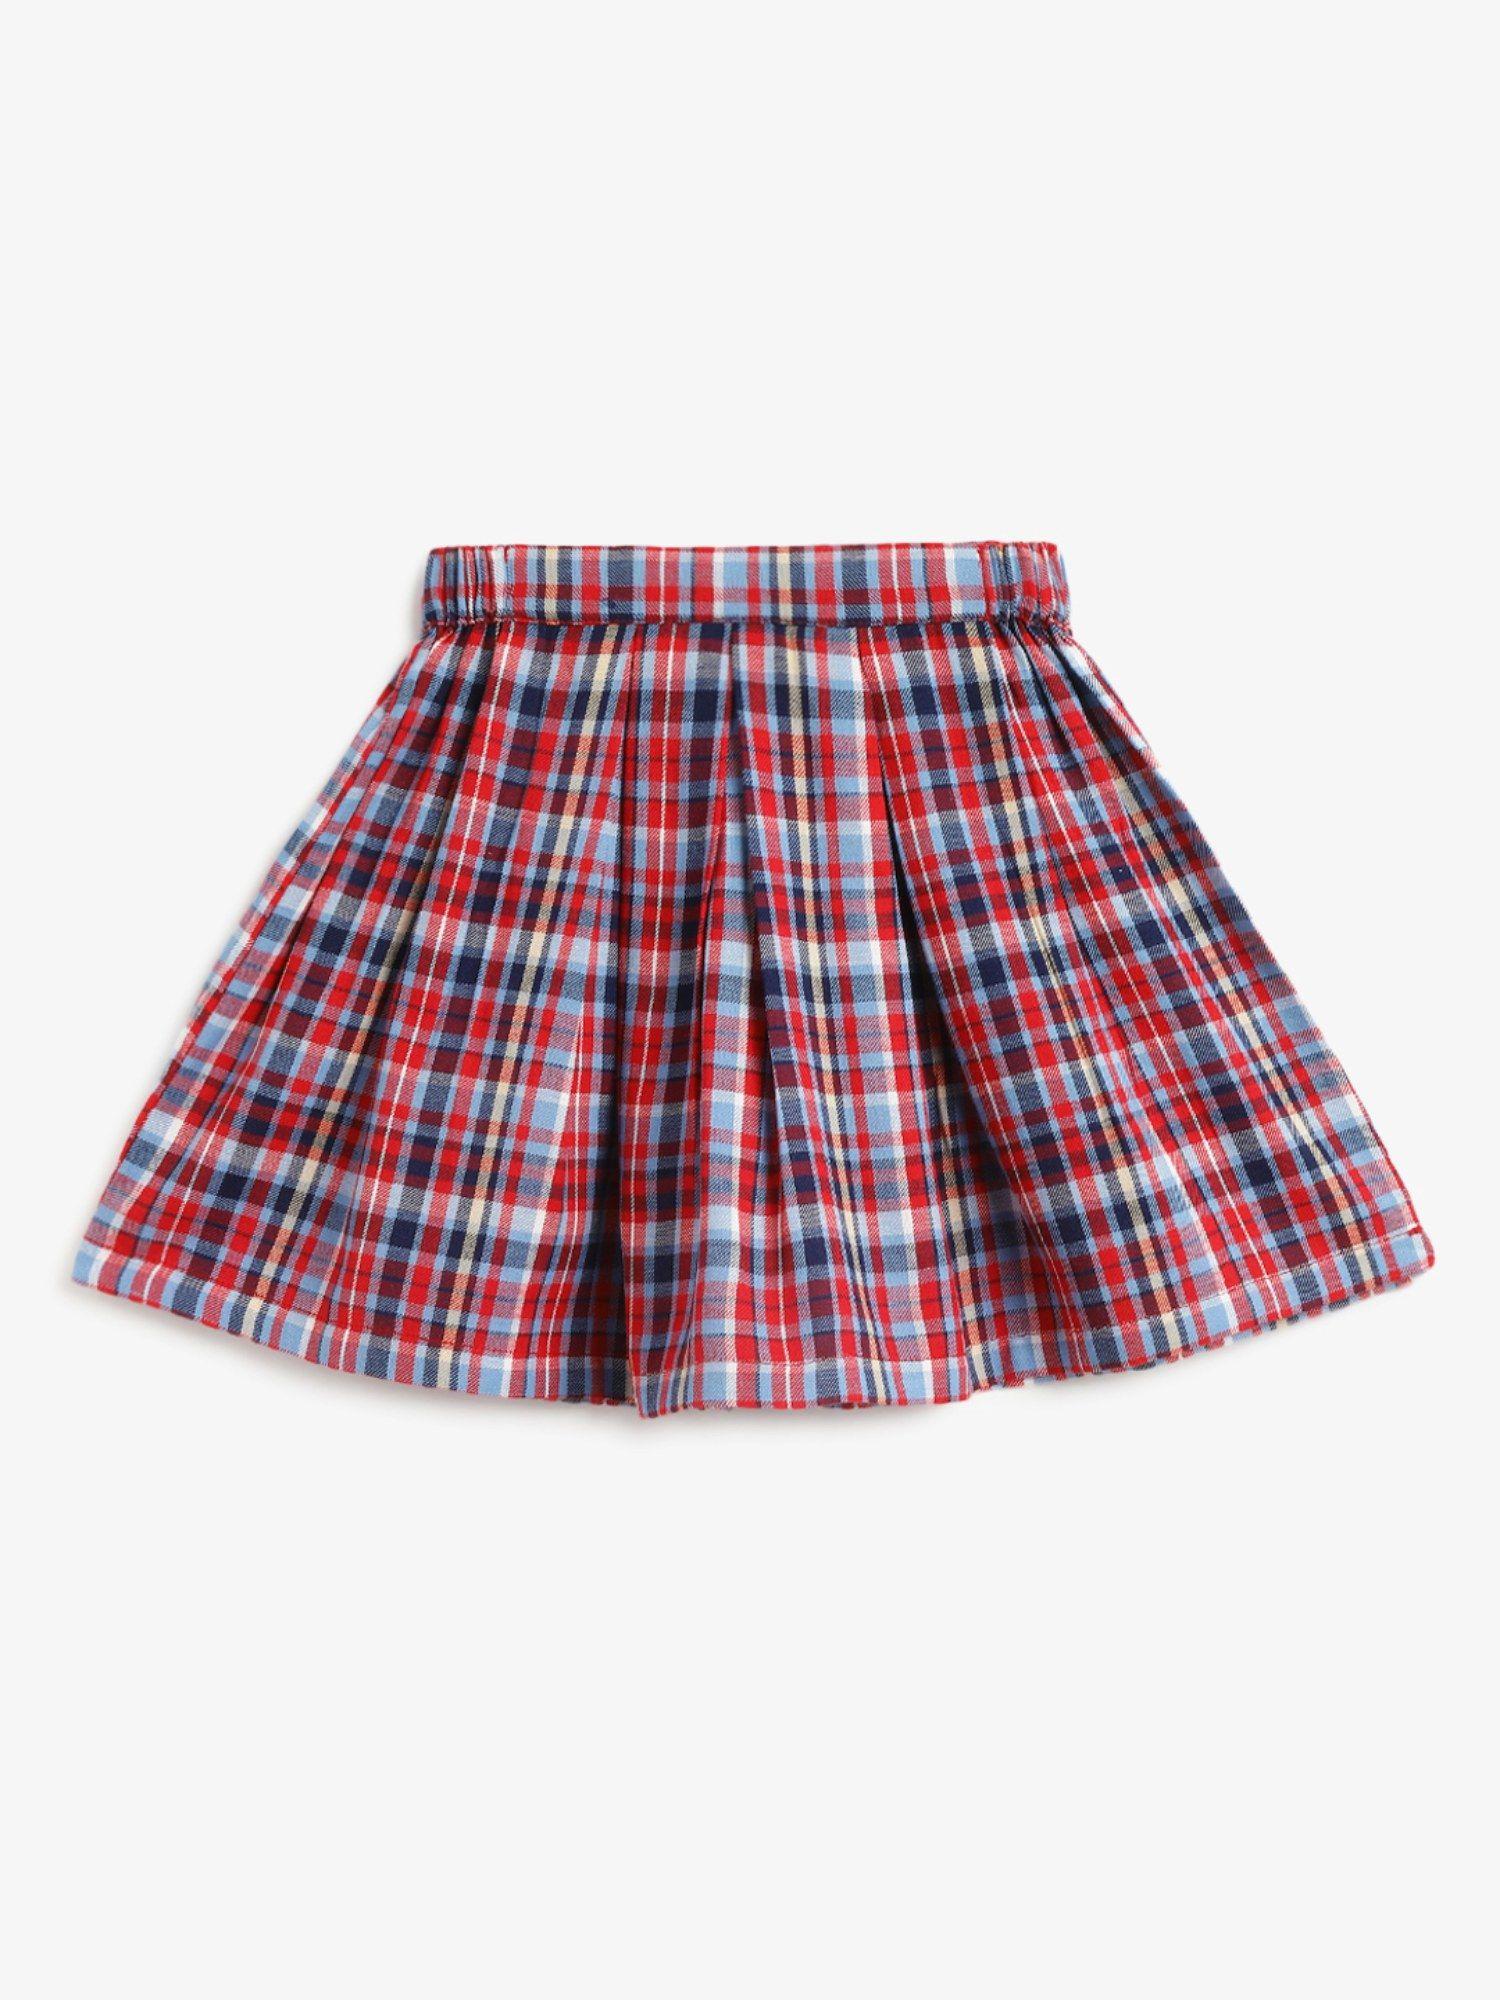 girls fiona pleated skirt checks red french blue